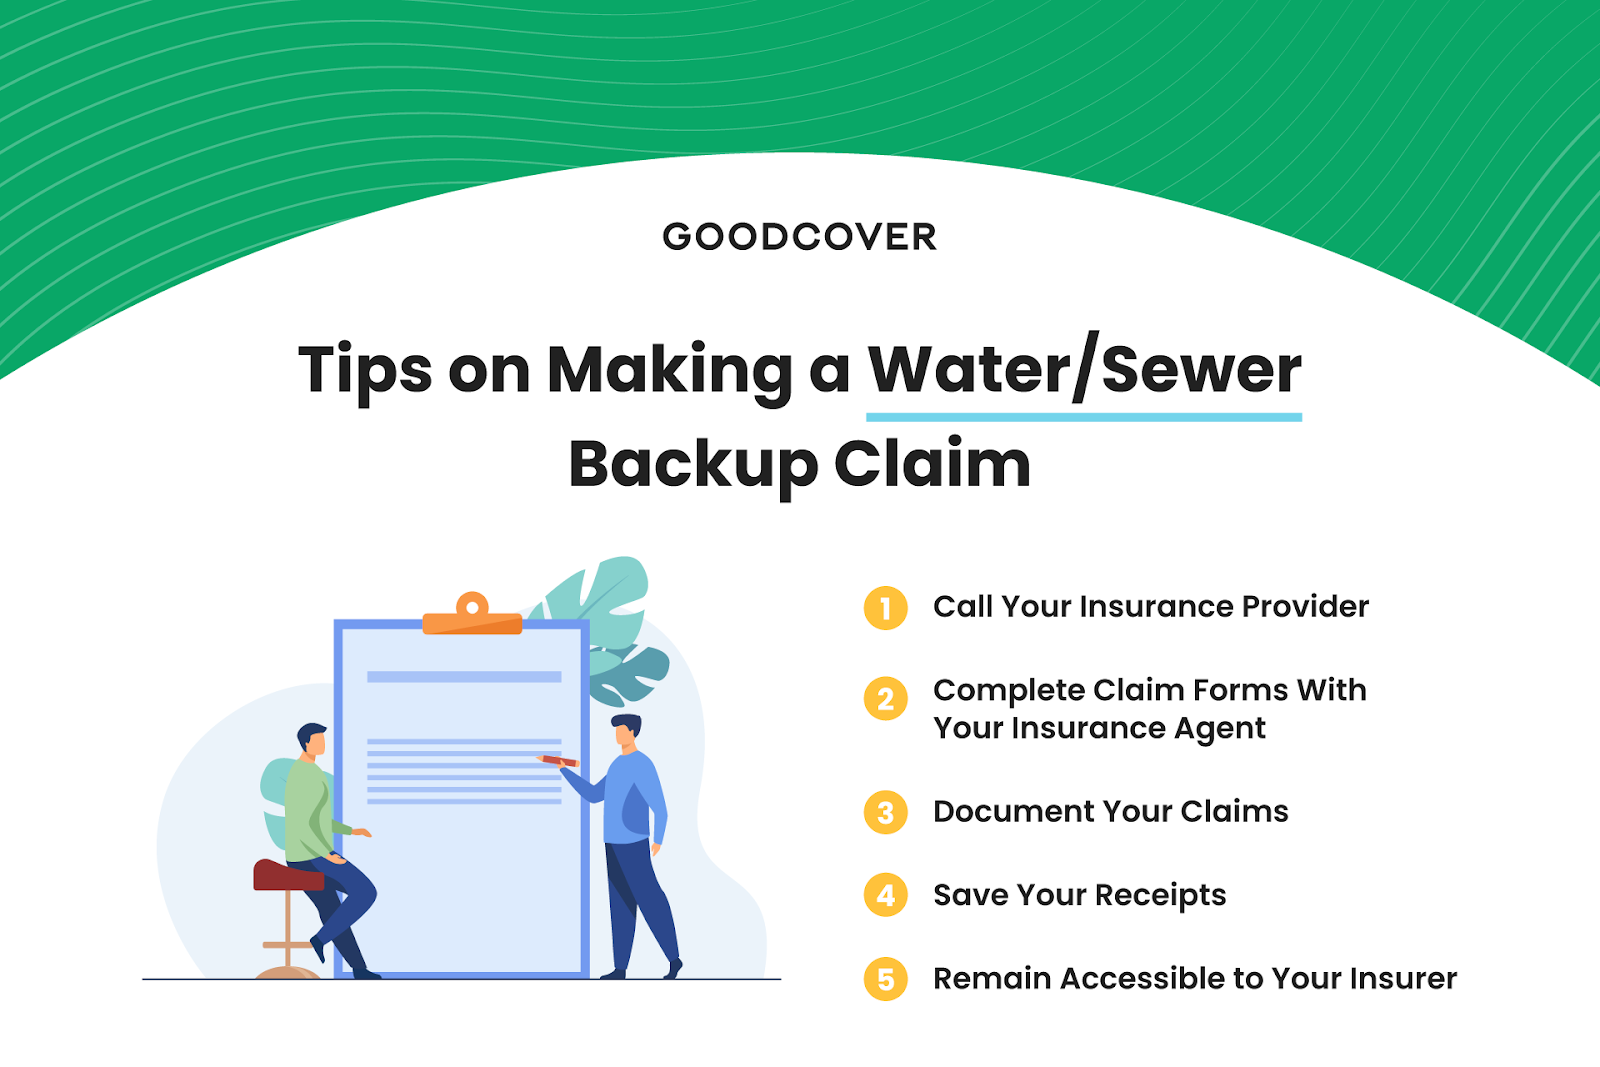 Goodcover’s Water and Sewer Backup Coverage: How It Works